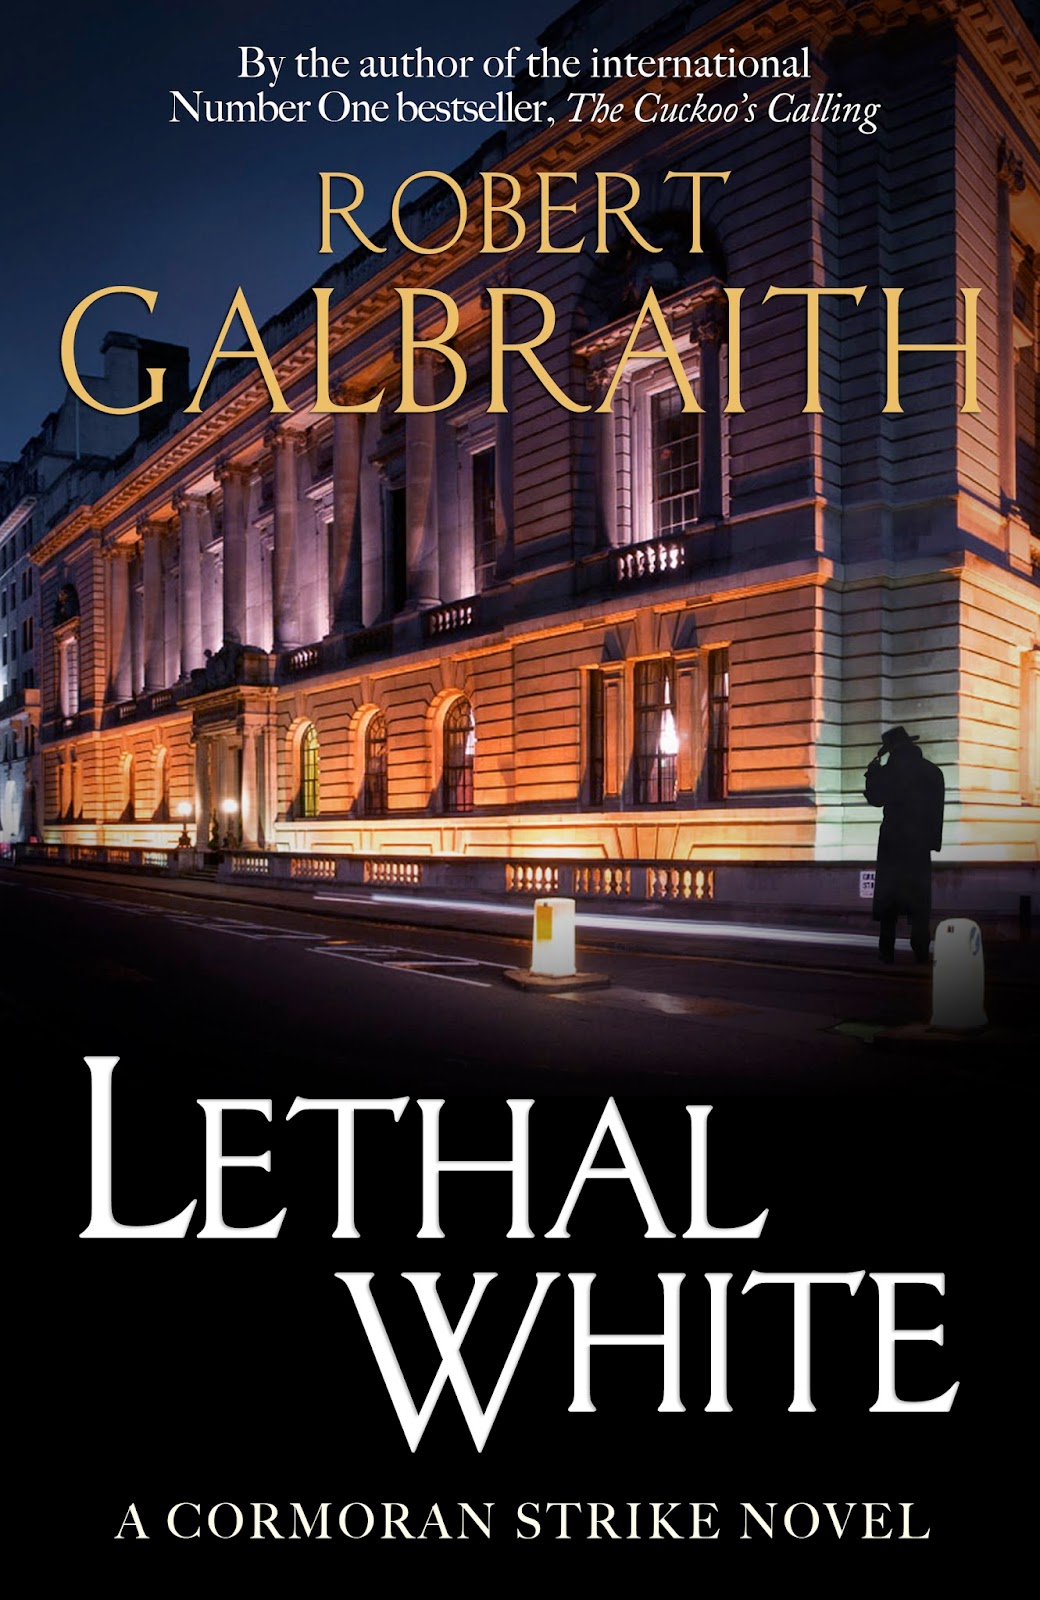 Lethal White by Robert Galbraith (UK Edition)